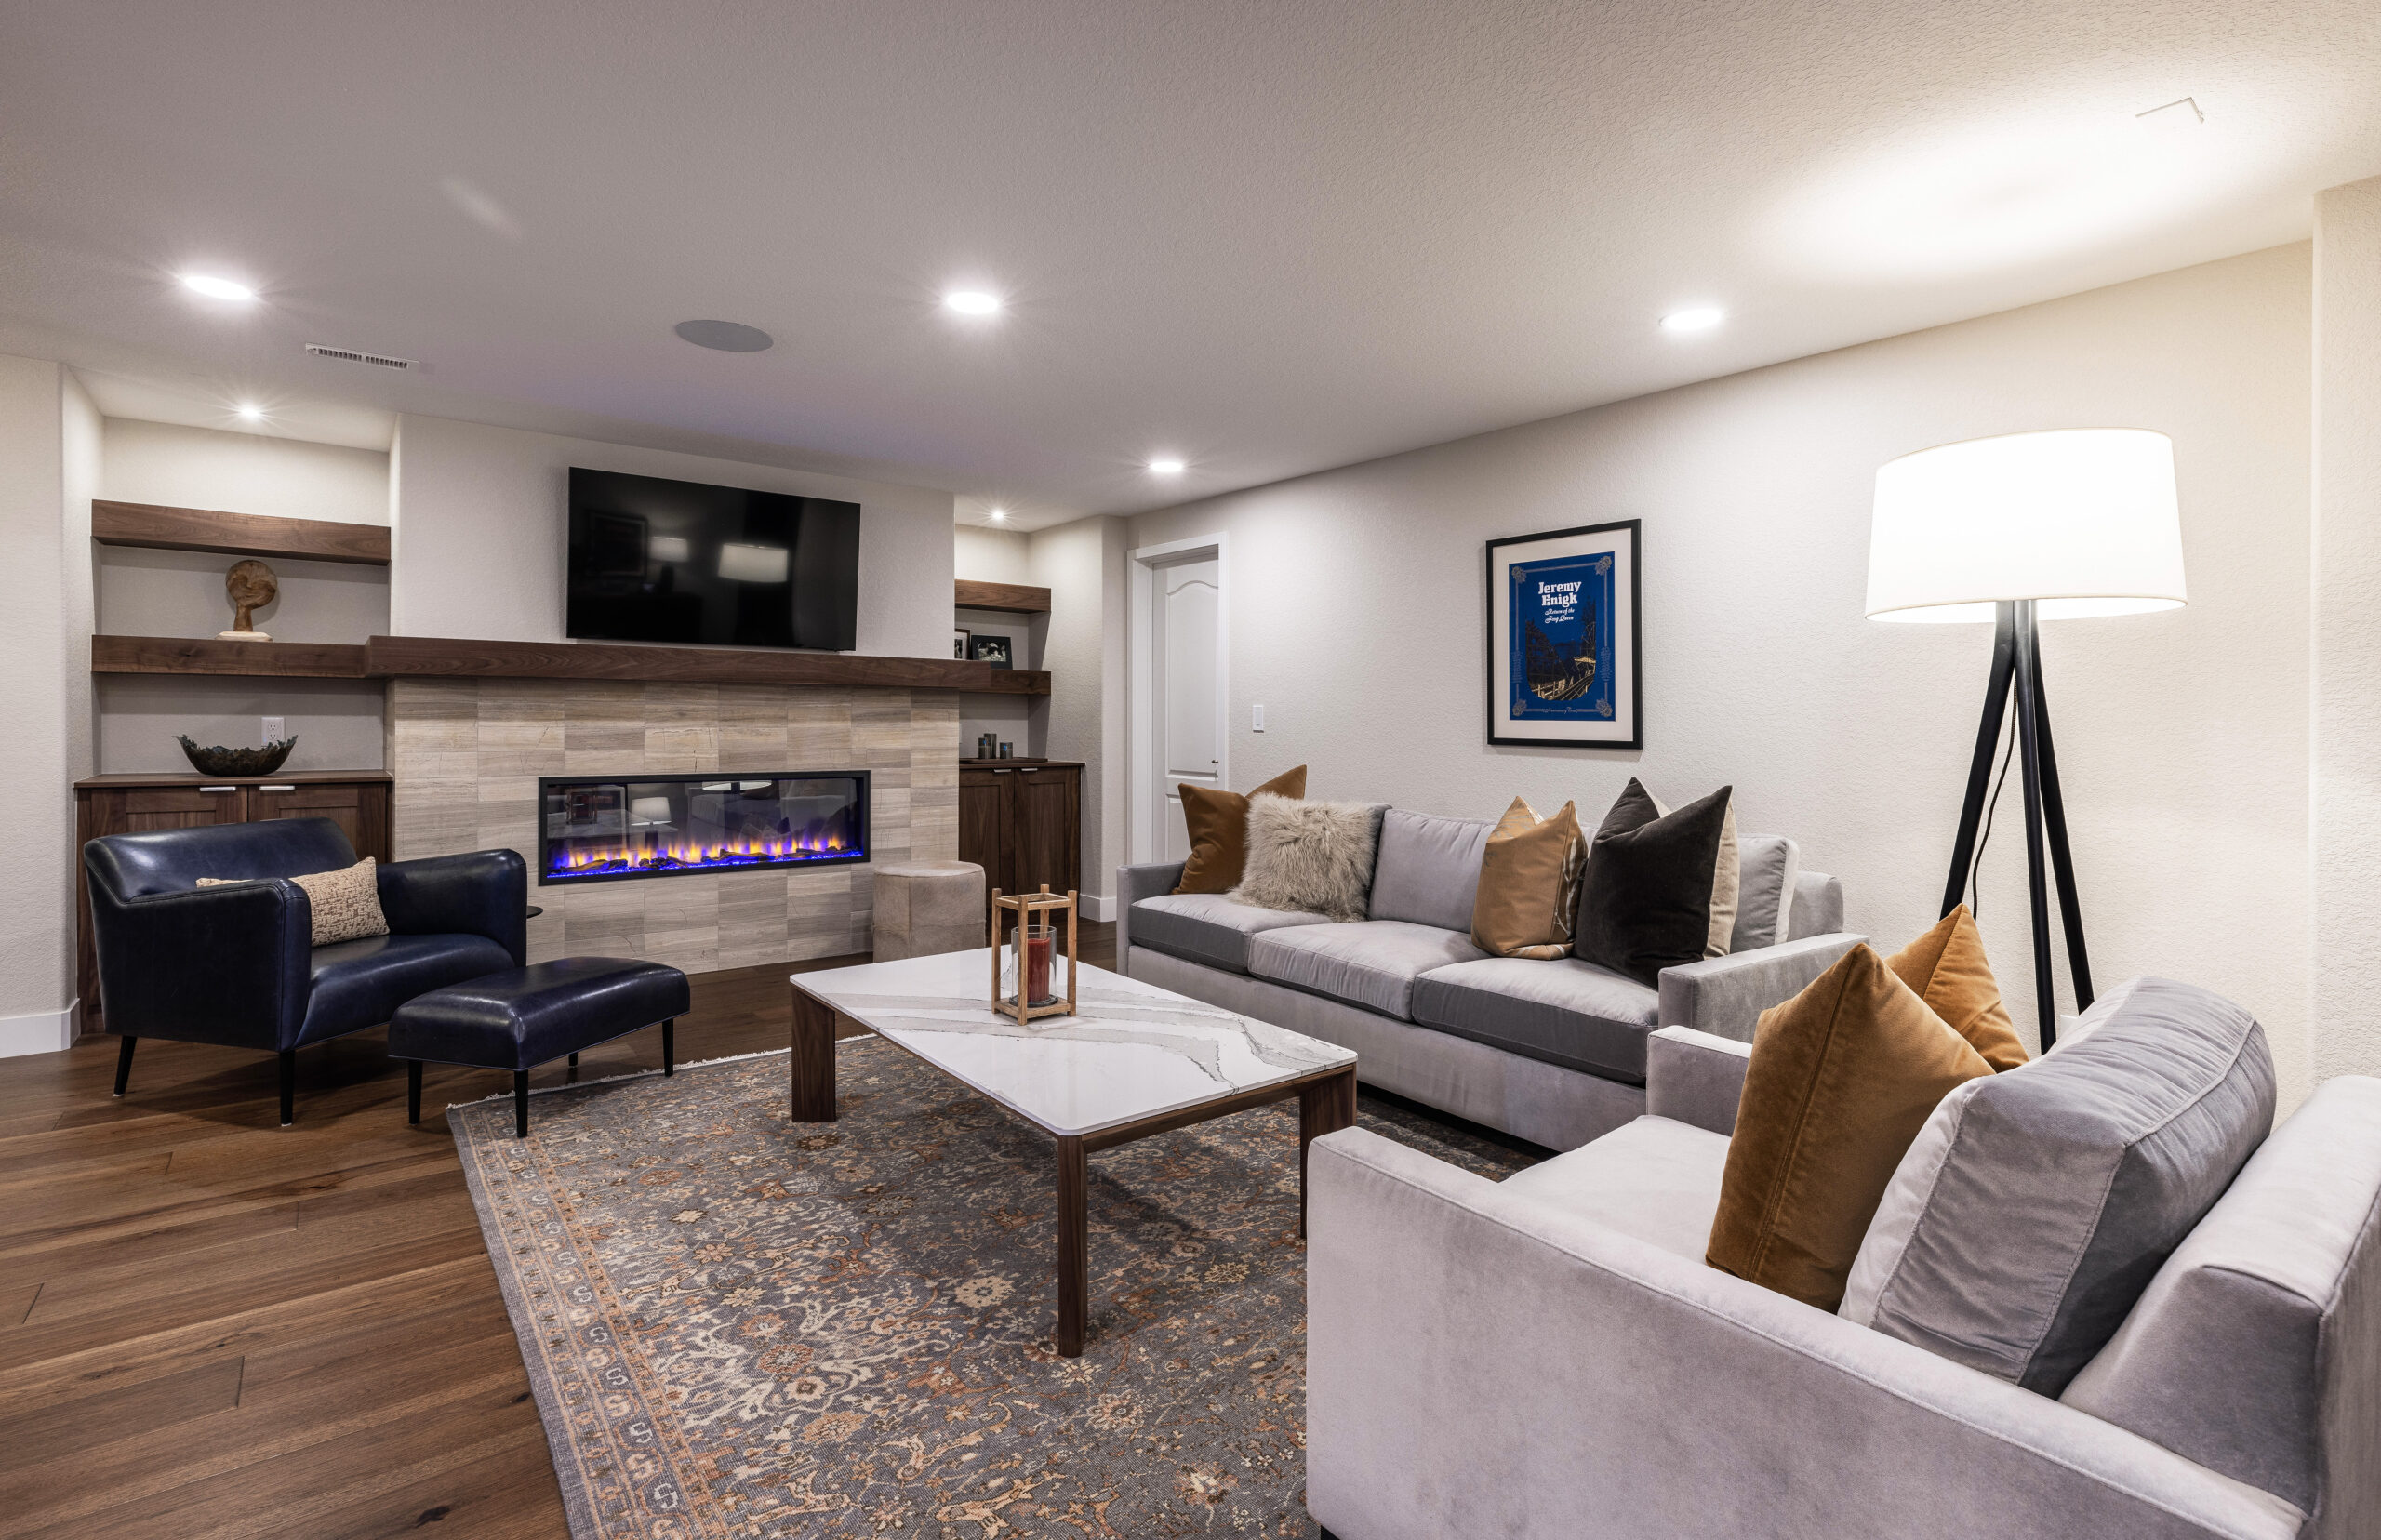 Cozy basement living room with a fireplace, large sectional sofa, armchair, and a TV, illustrating a comfortable and stylish space.